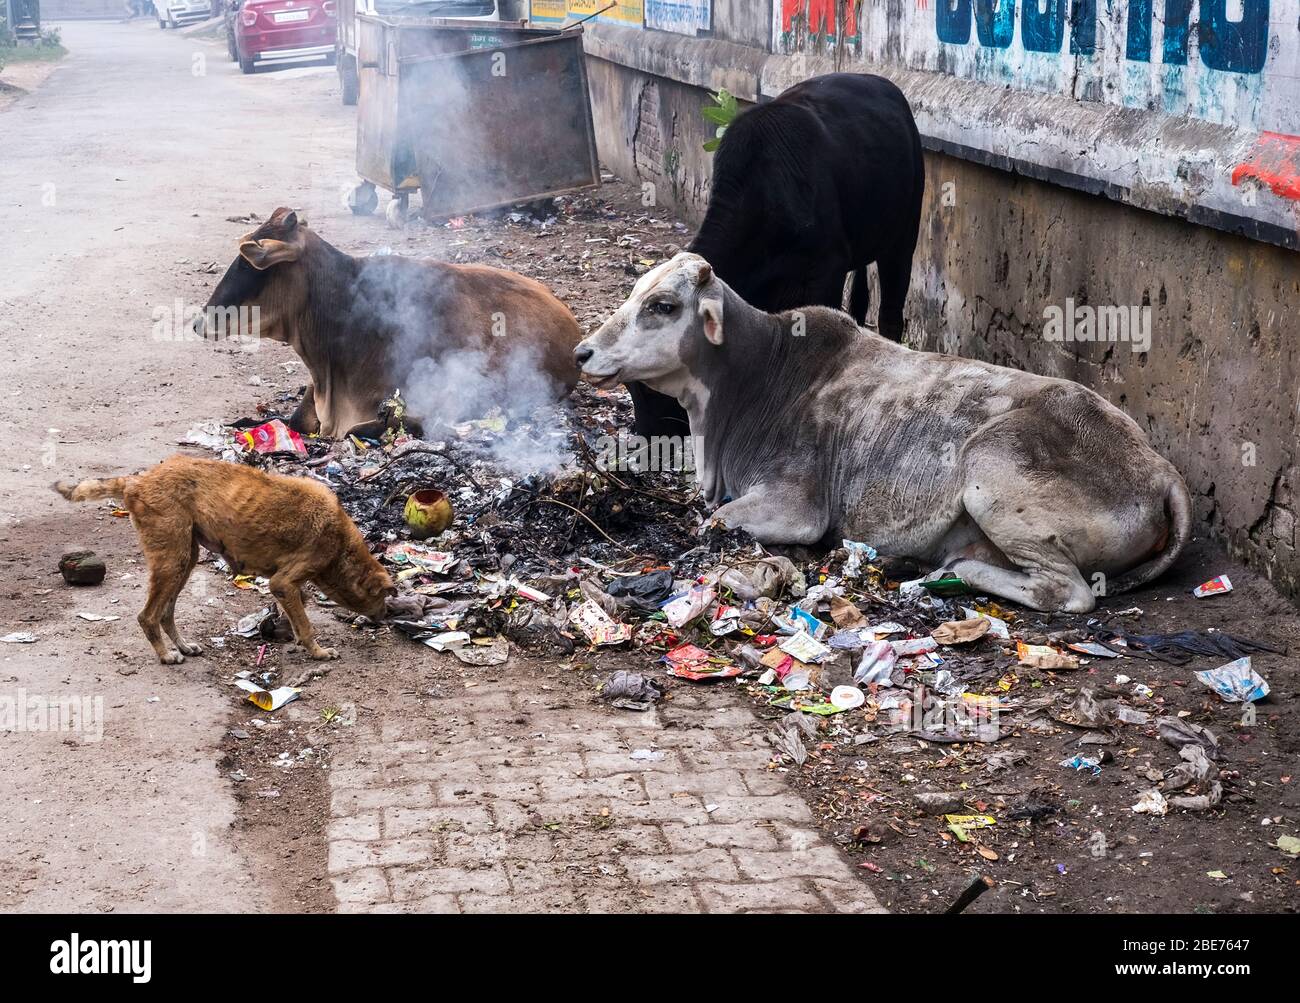 burning rubbish and stray cows and dogs on dirty streets of Varanasi, India Stock Photo